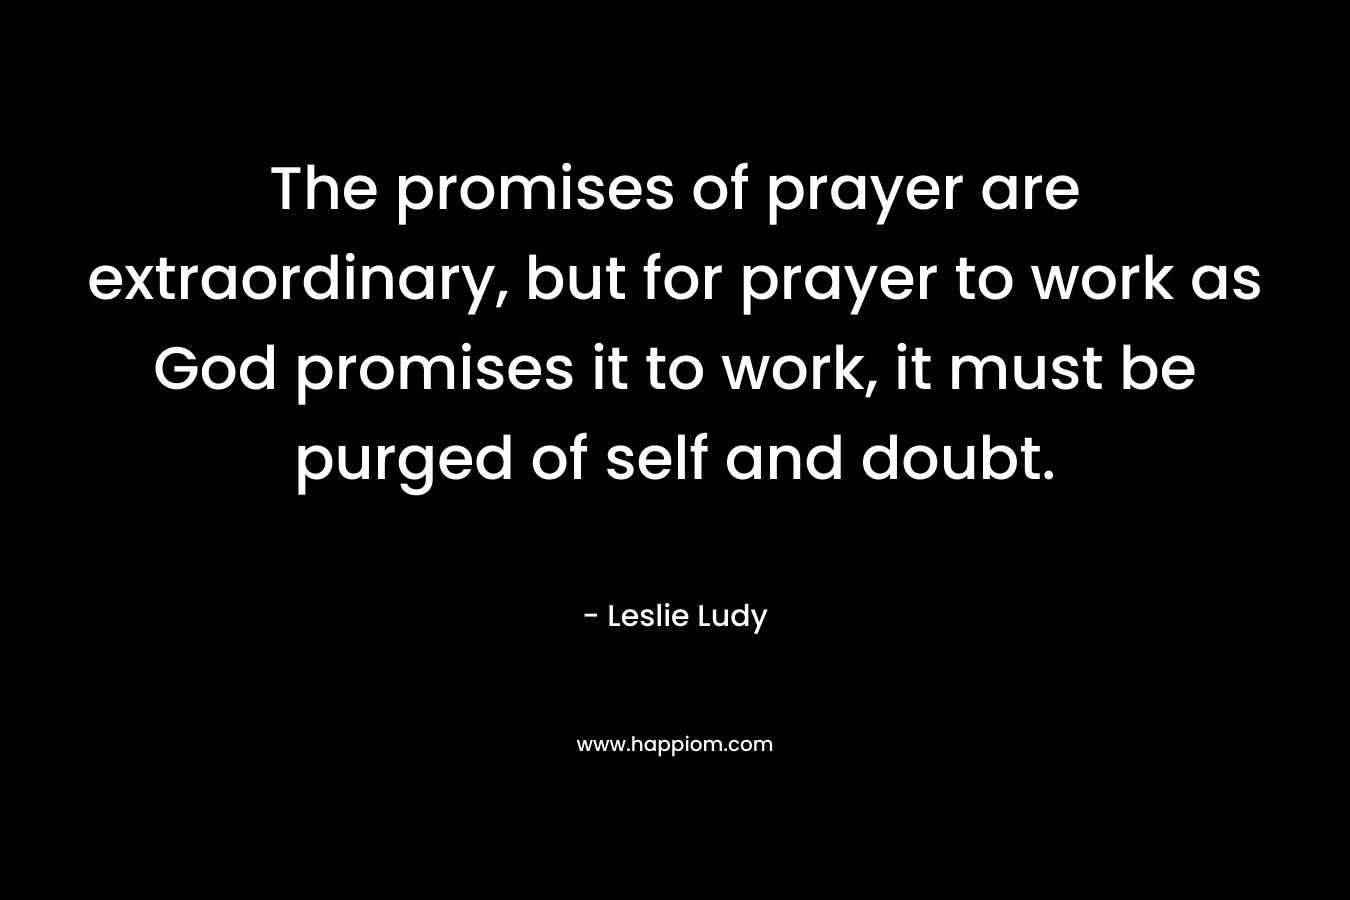 The promises of prayer are extraordinary, but for prayer to work as God promises it to work, it must be purged of self and doubt.